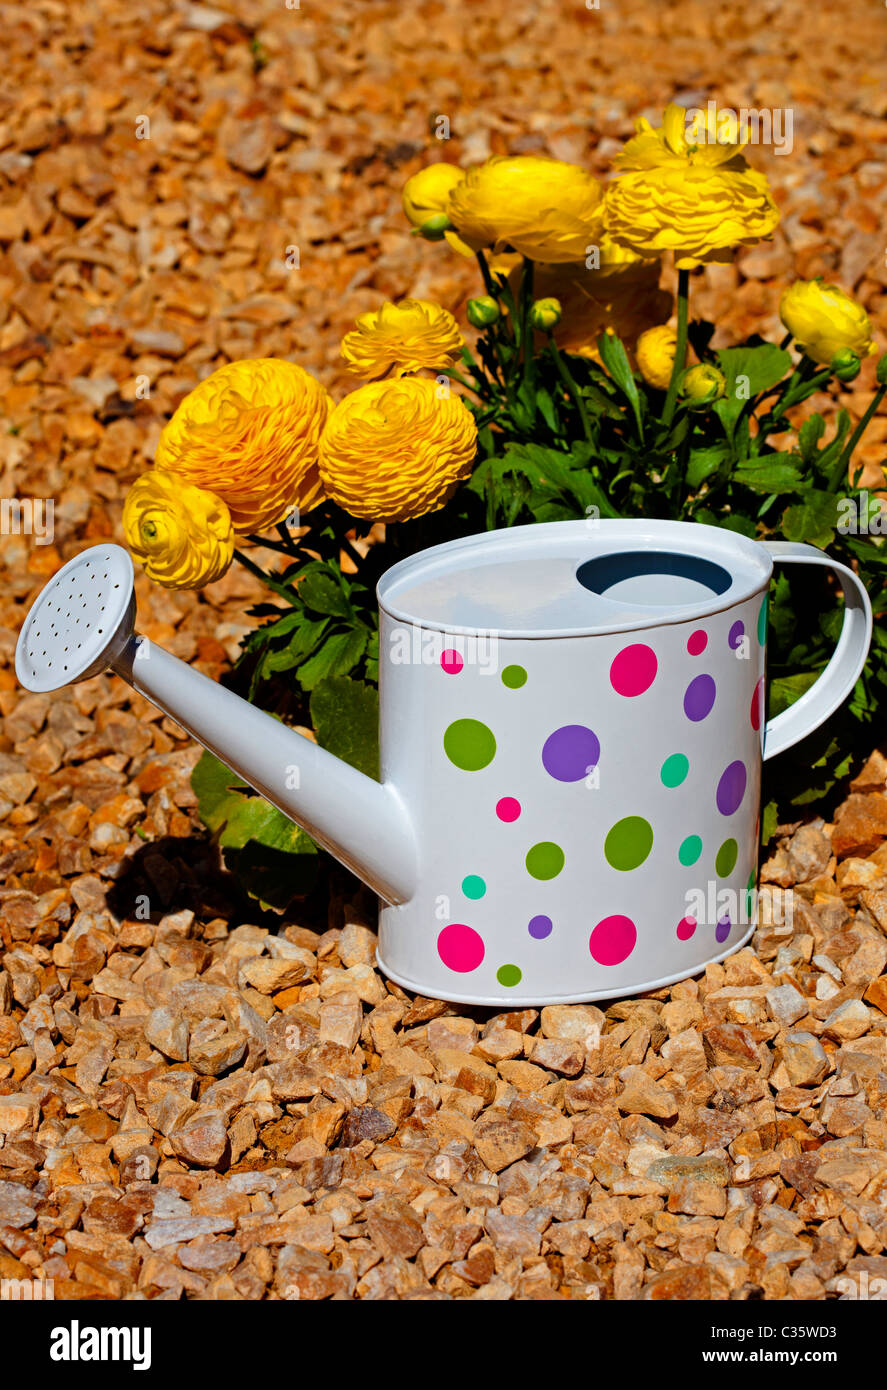 Yellow Ranunculus flowers with ornamental watering can on gravel Stock Photo